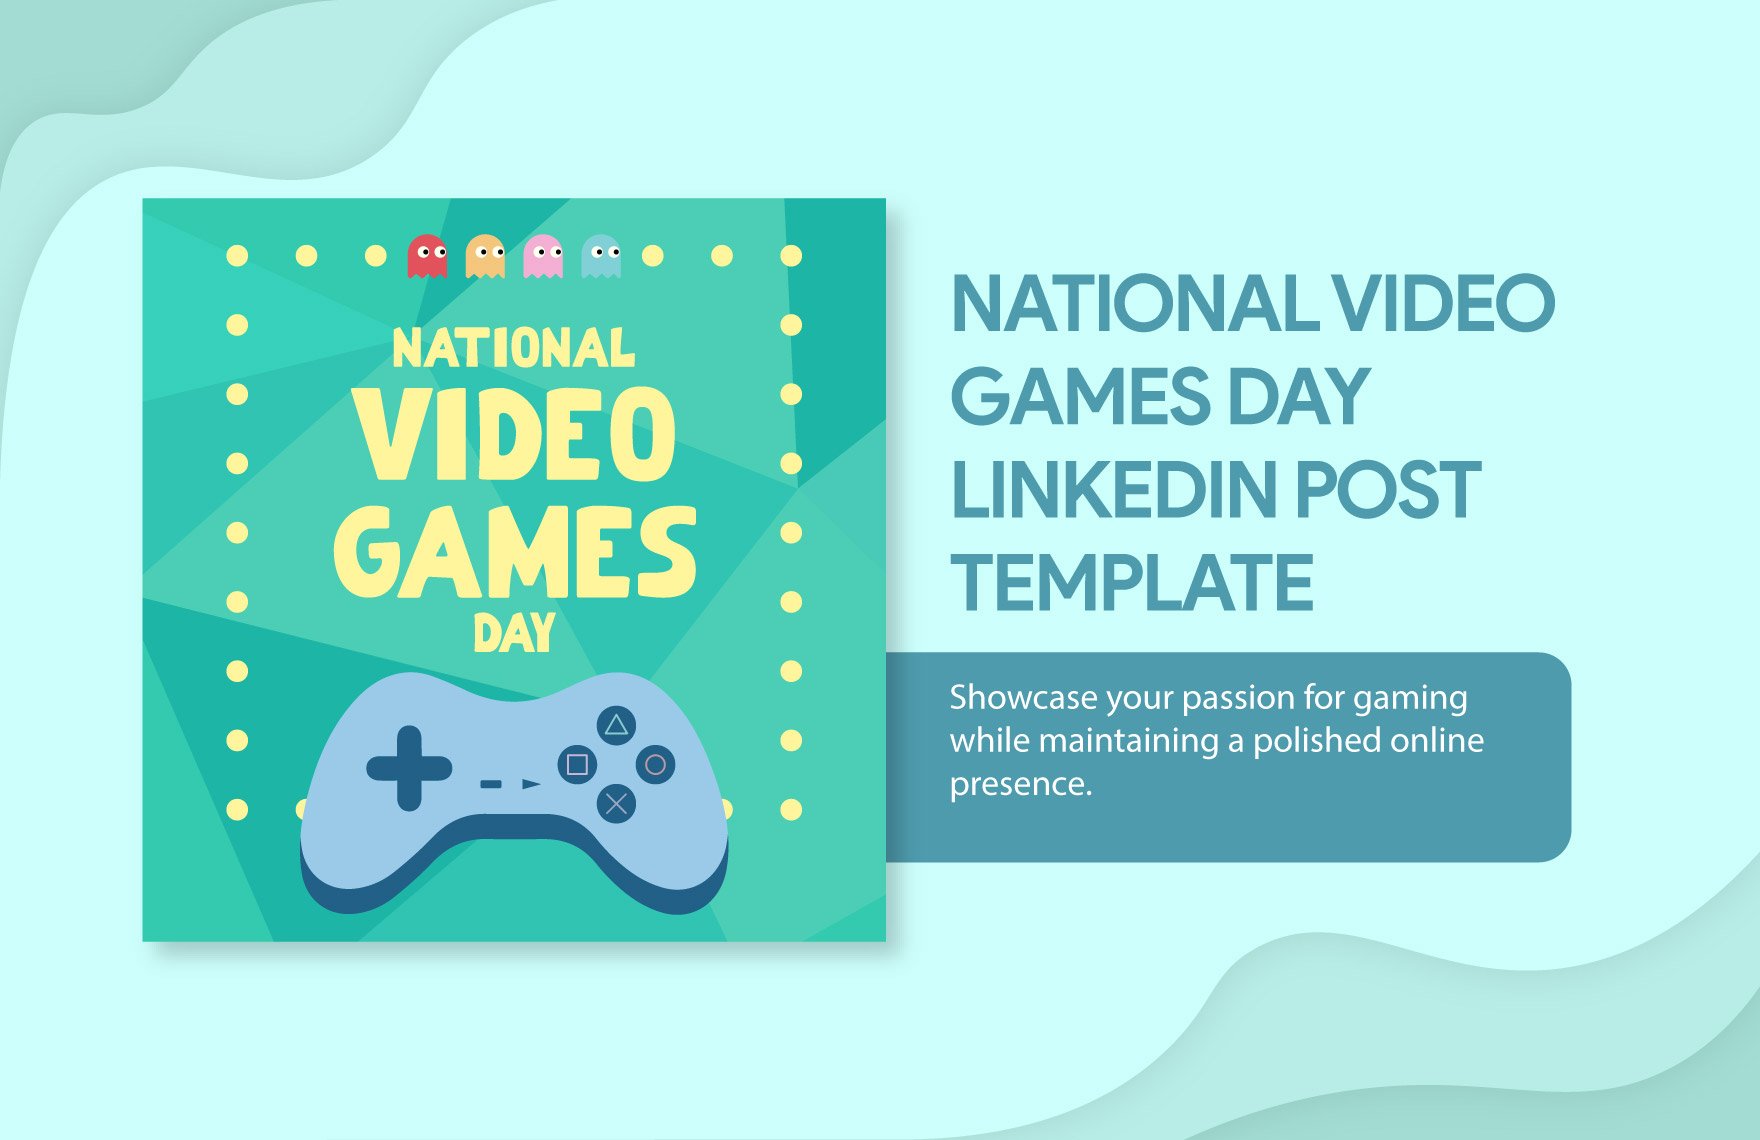 Free National Video Games Day LinkedIn Post Template in Illustrator, PSD, PNG